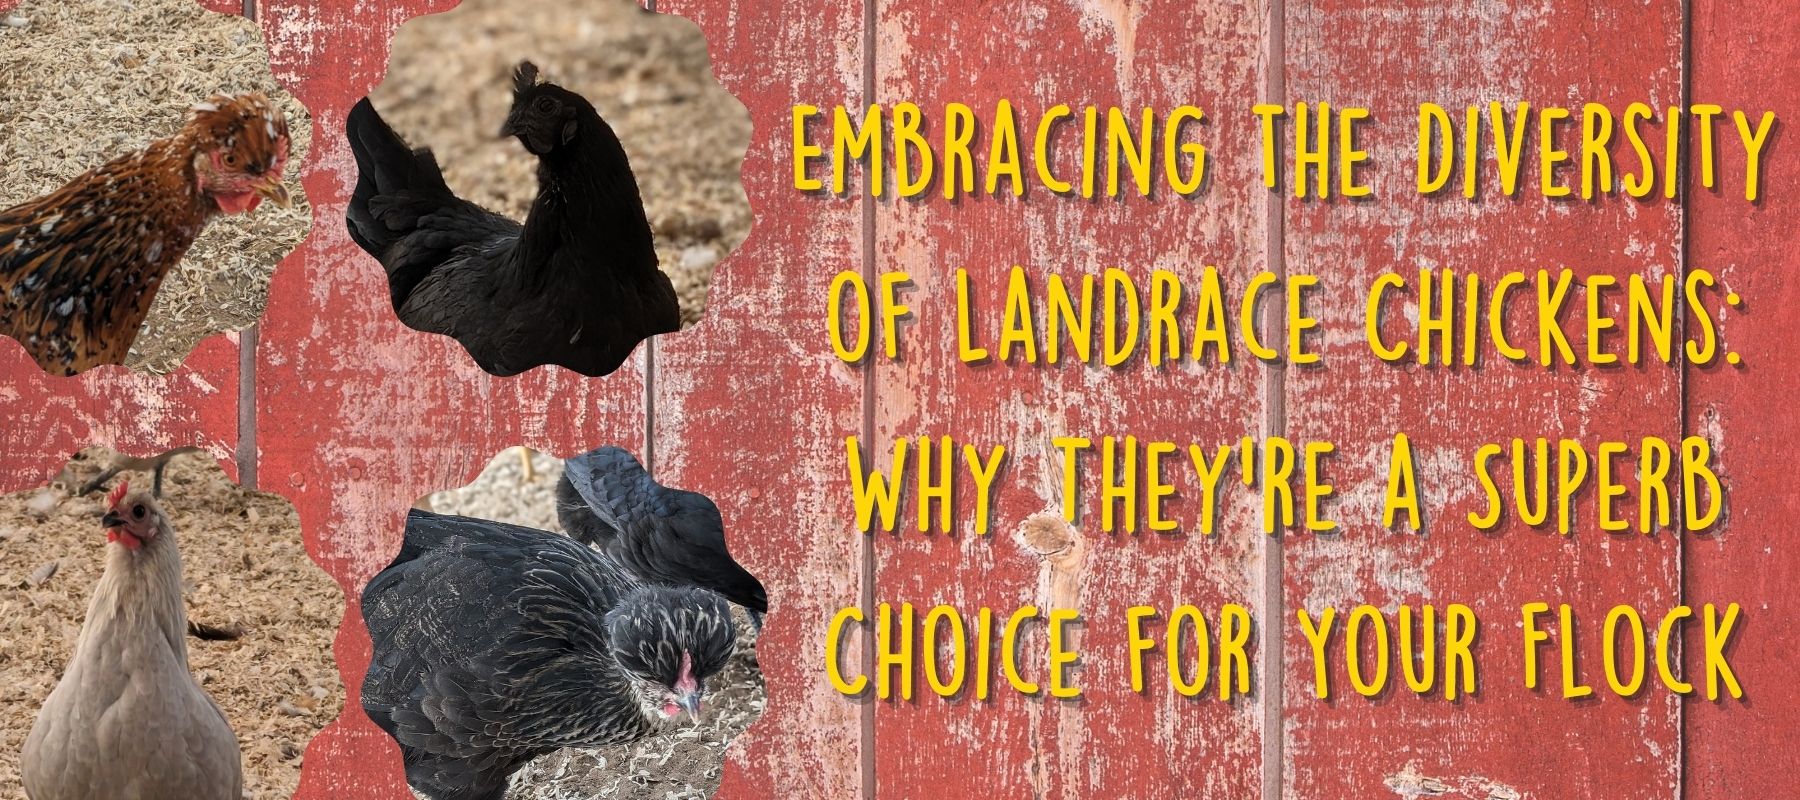 Embracing the Diversity of Landrace Chickens: Why They're a Superb Choice for Your Flock